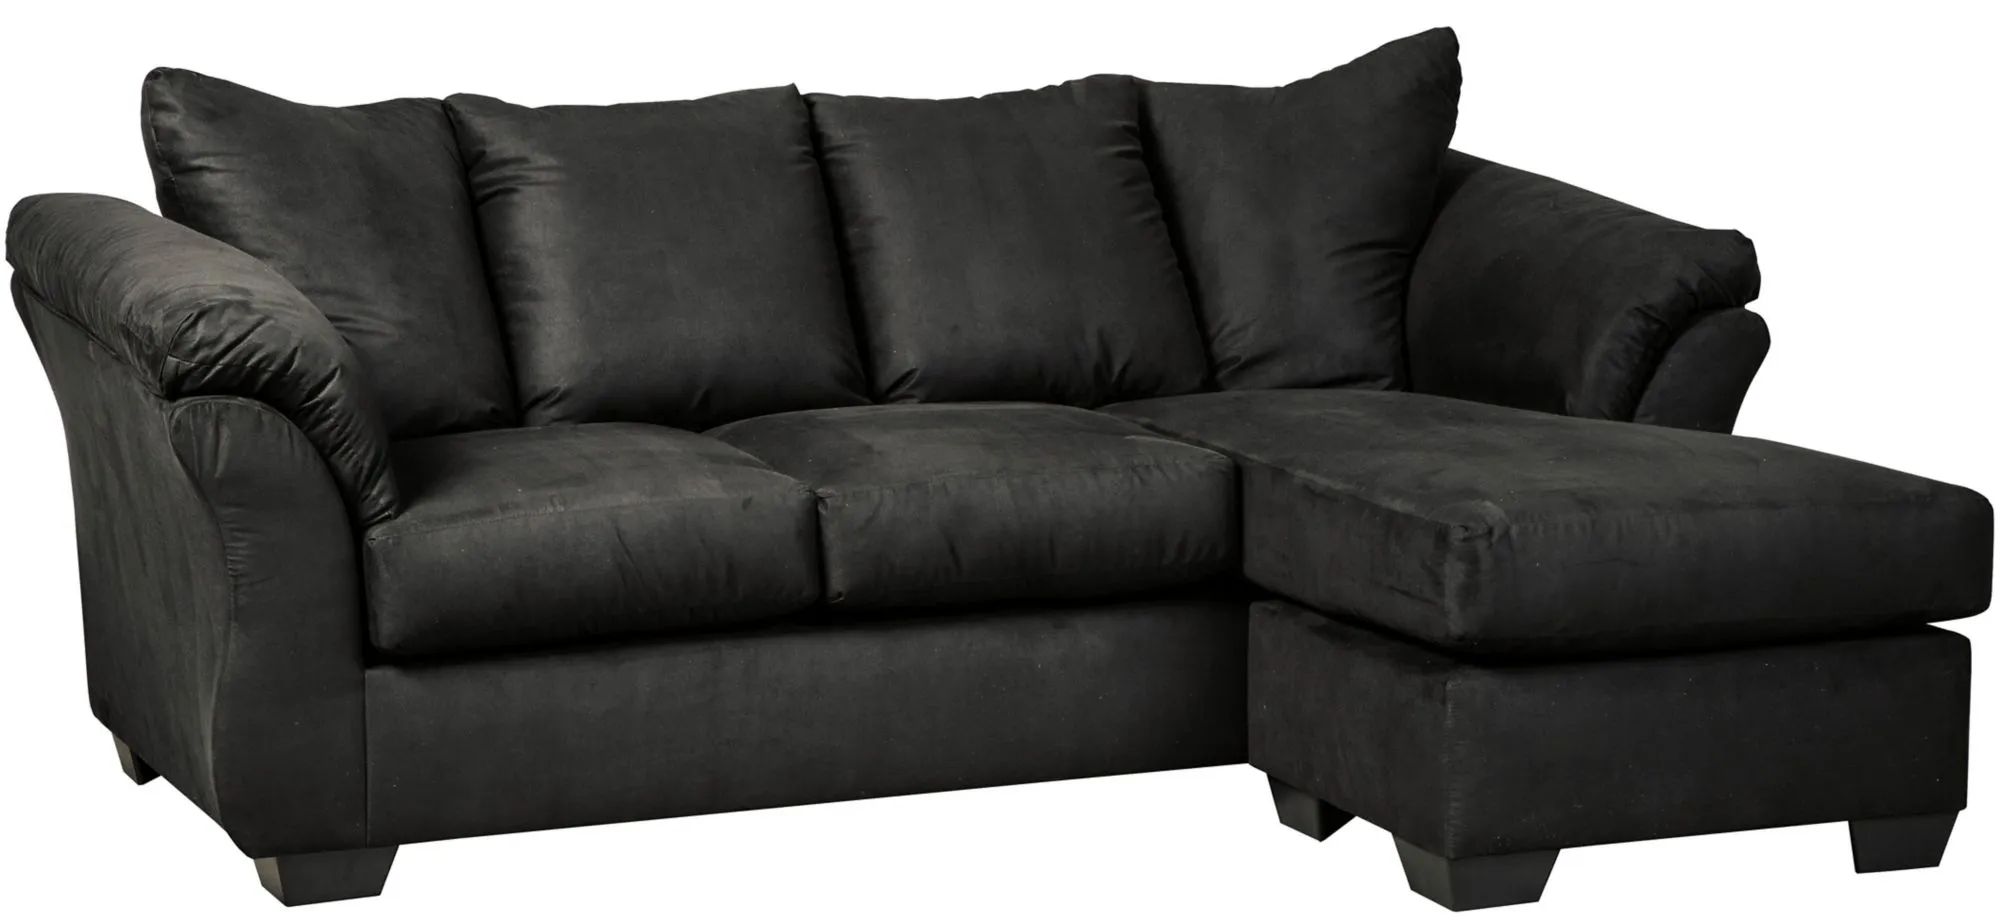 Whitman 2-pc. Sectional Sofa with Reversible Chaise in Black by Ashley Furniture